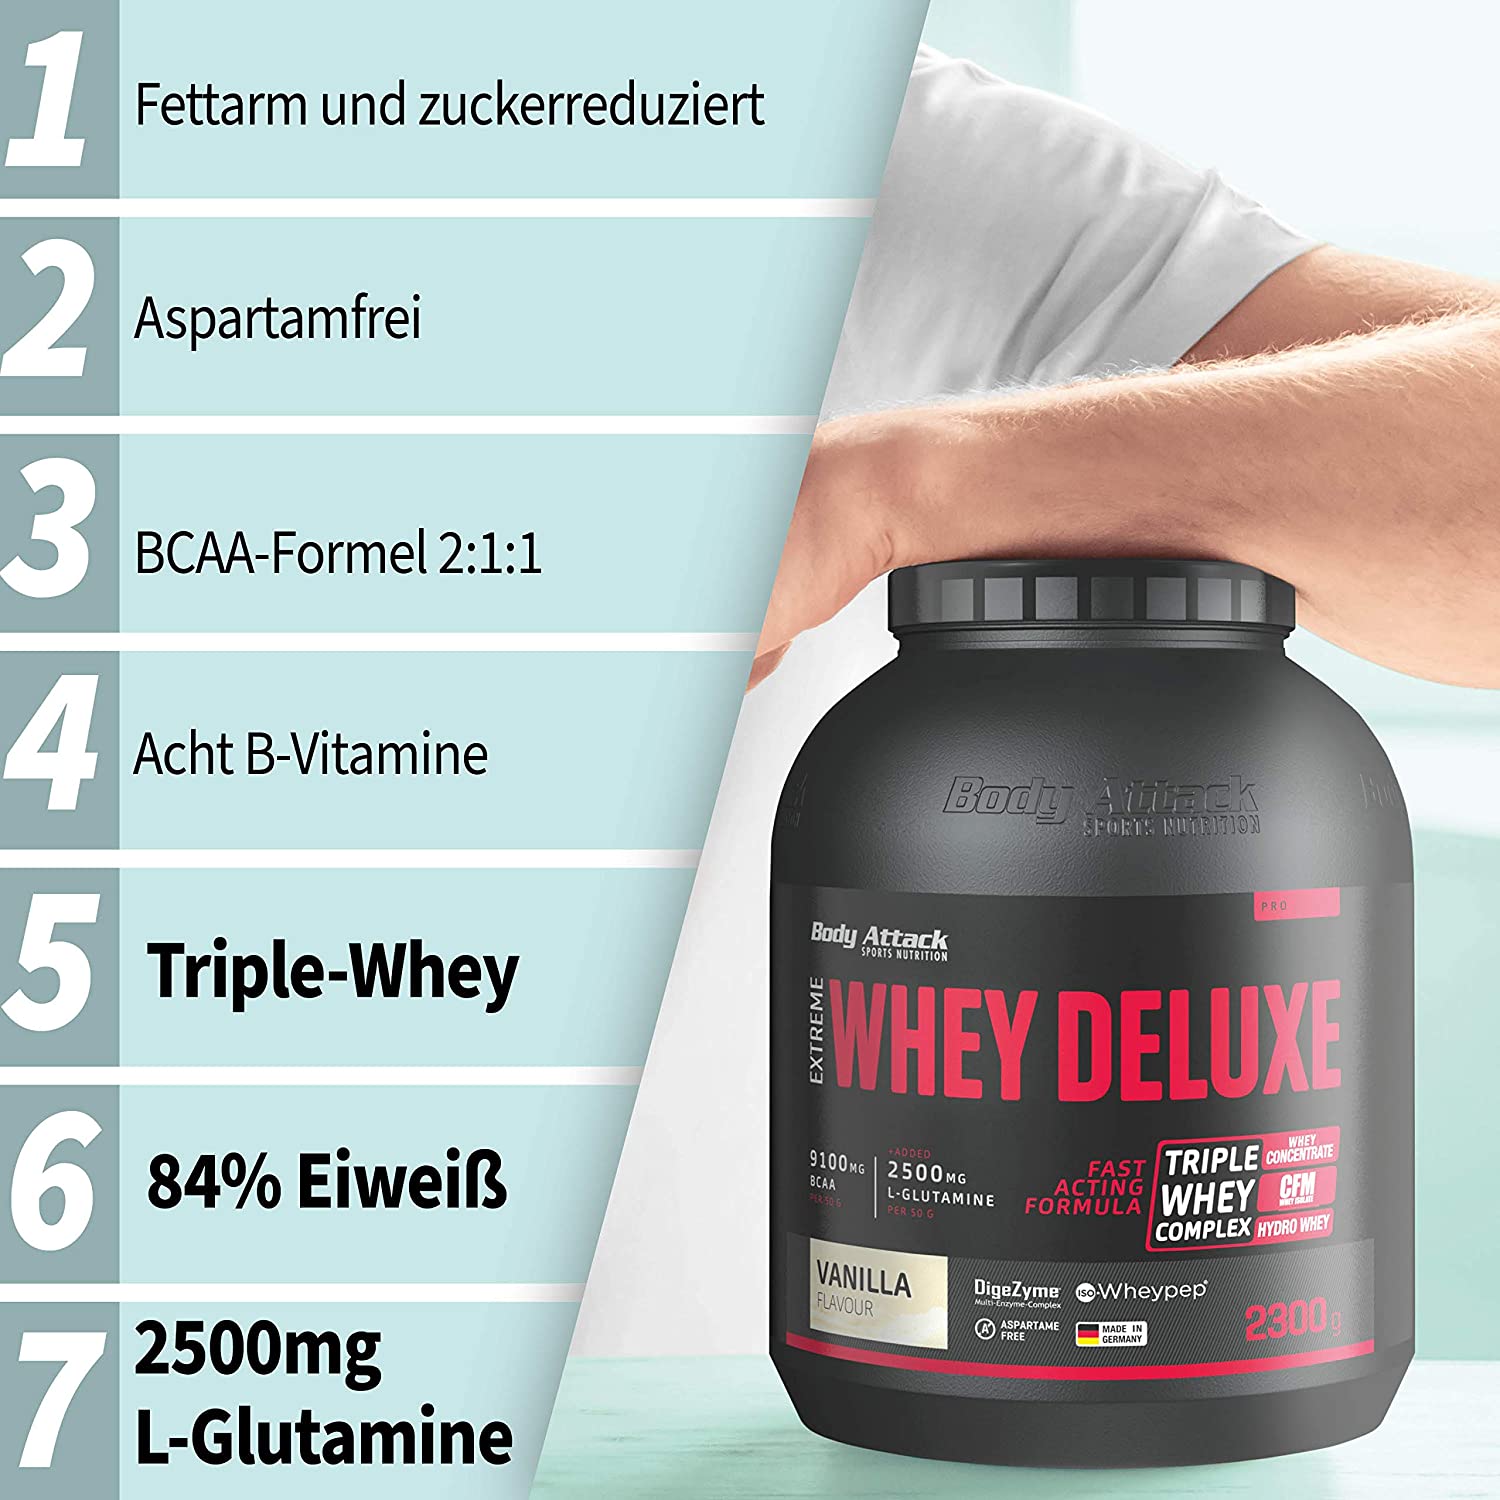 Body Attack Extreme Whey Deluxe Bulletpoints